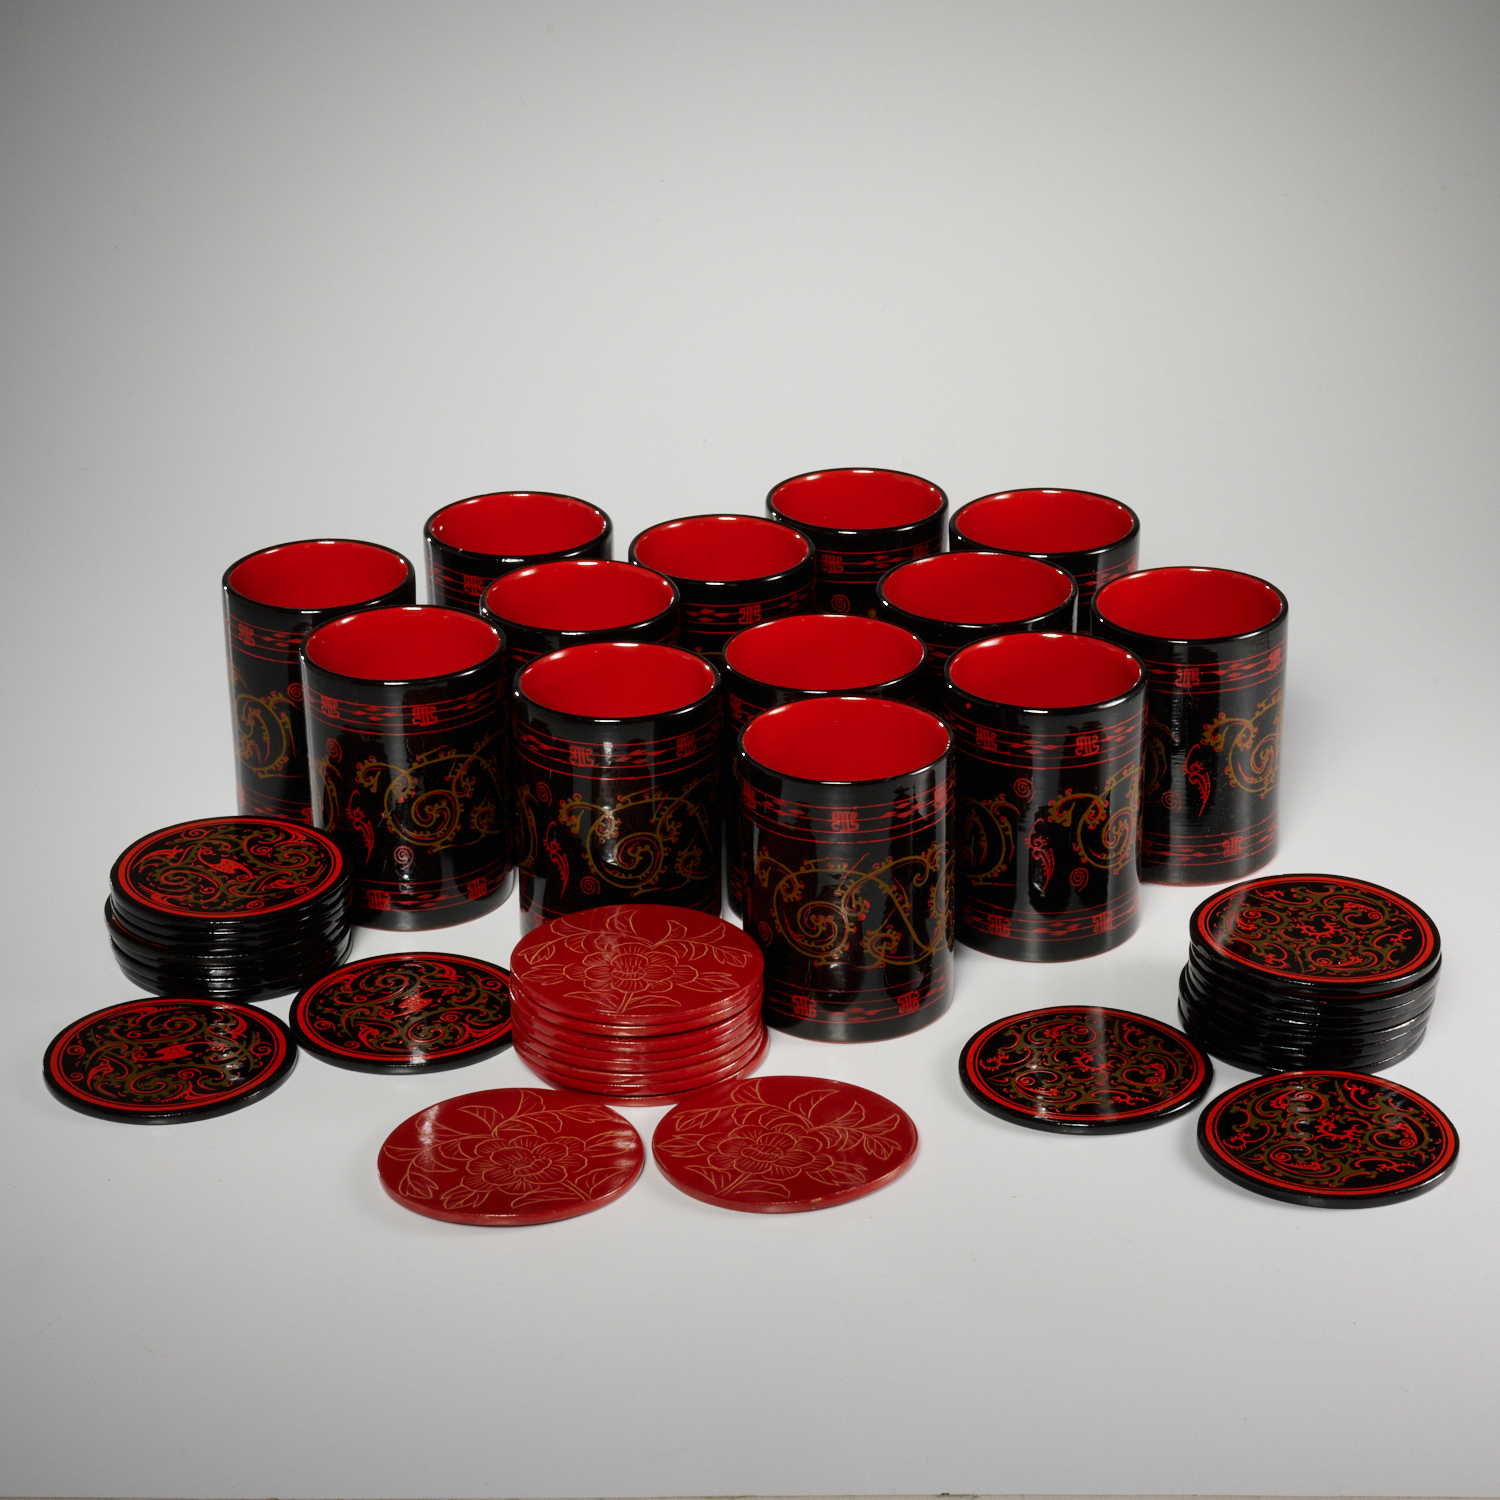 SHANGHI MUSEUM SHOP GROUP LACQUERWARE 3608ee